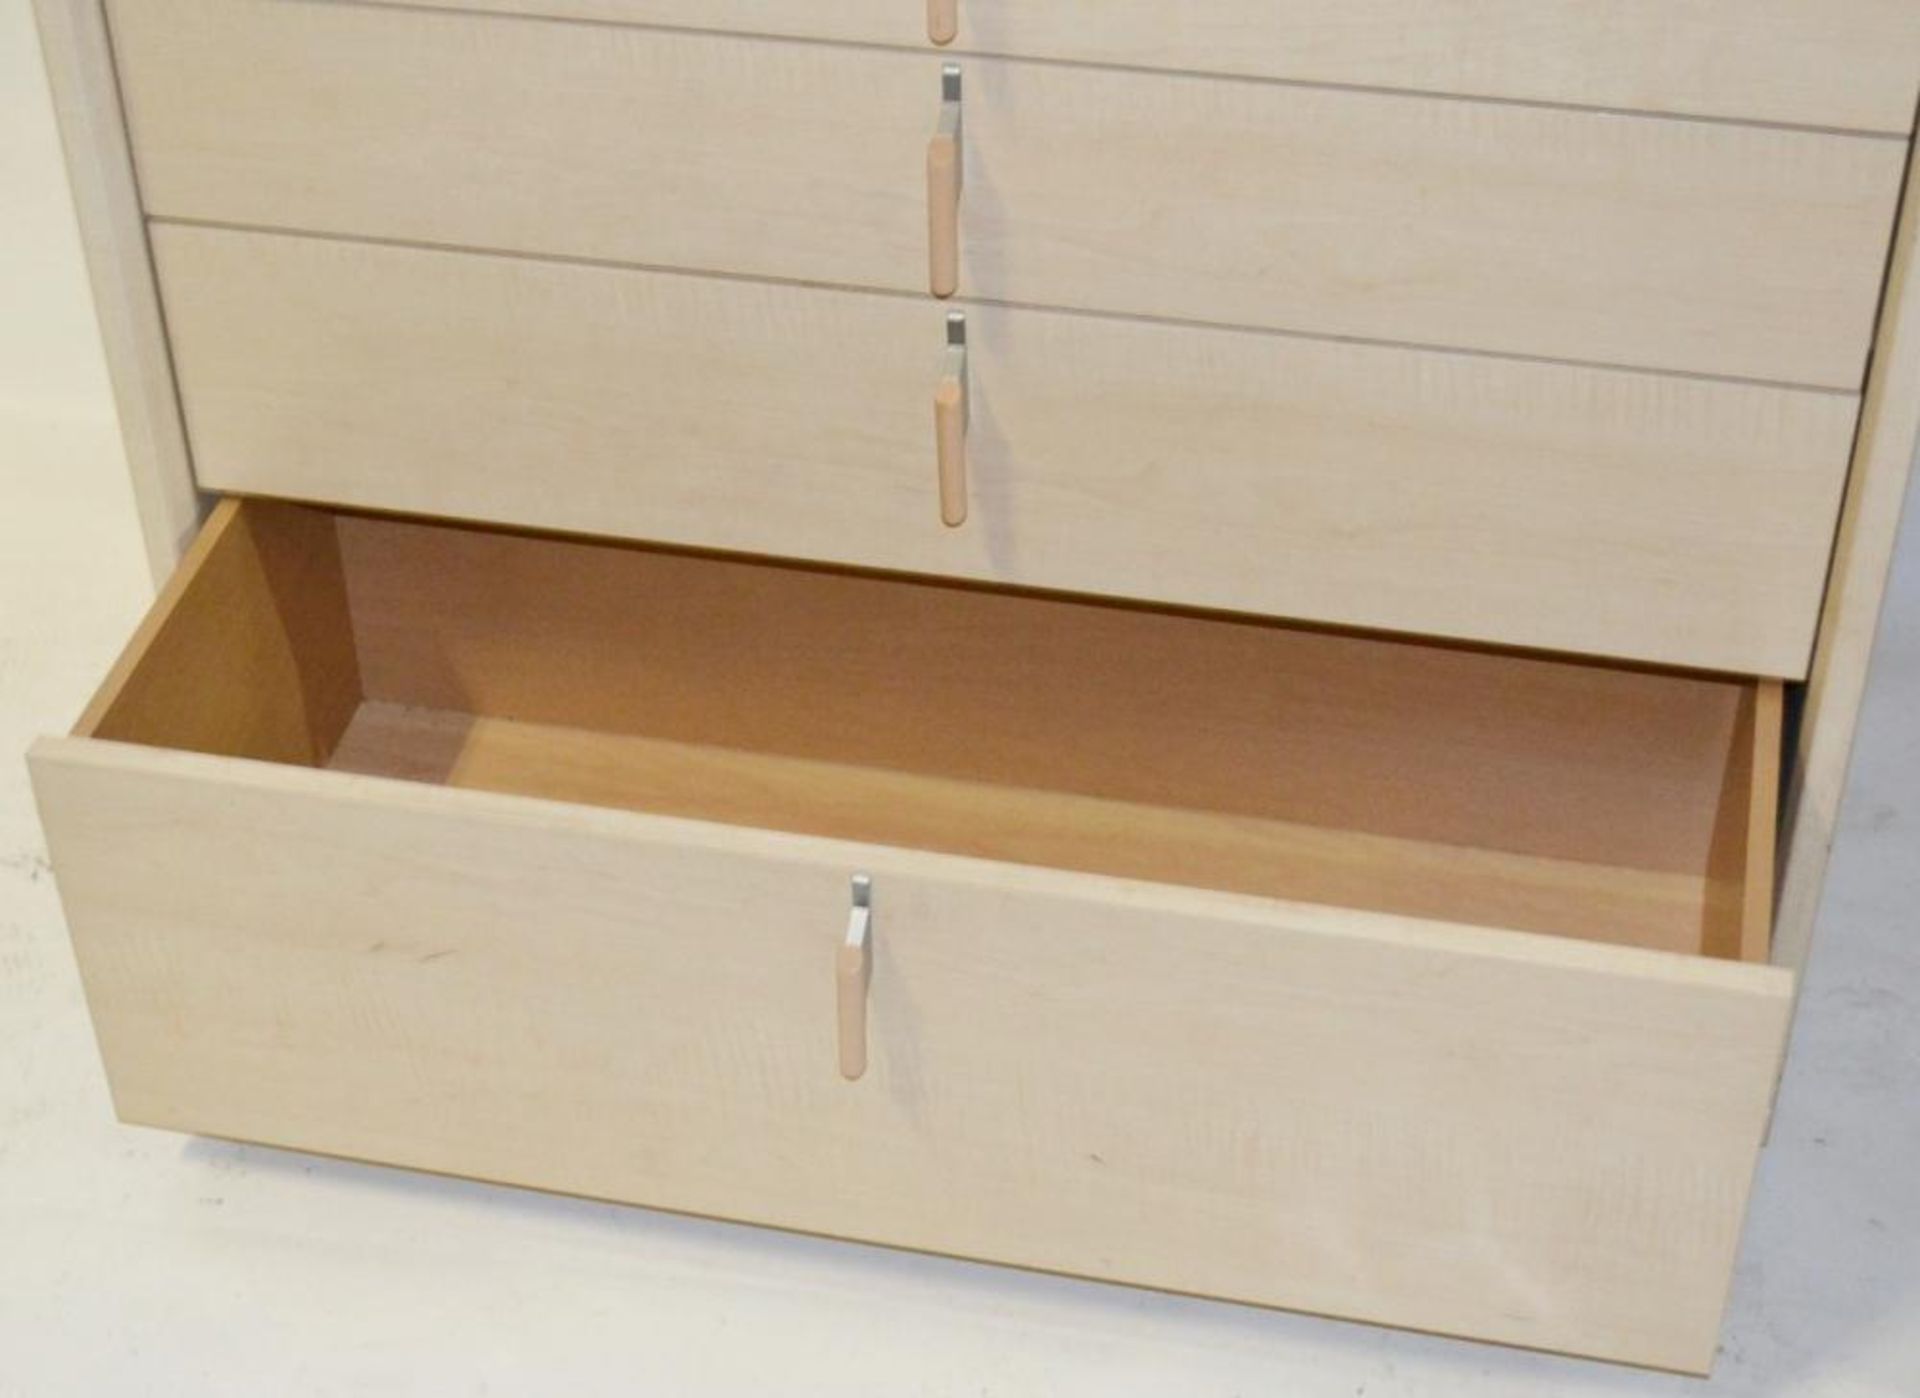 1 x GAUTIER Chest Of Drawers With A Natural Oak Finish - Dimensions: W94 x D45 x H79.5cm - CL268 - R - Image 5 of 5